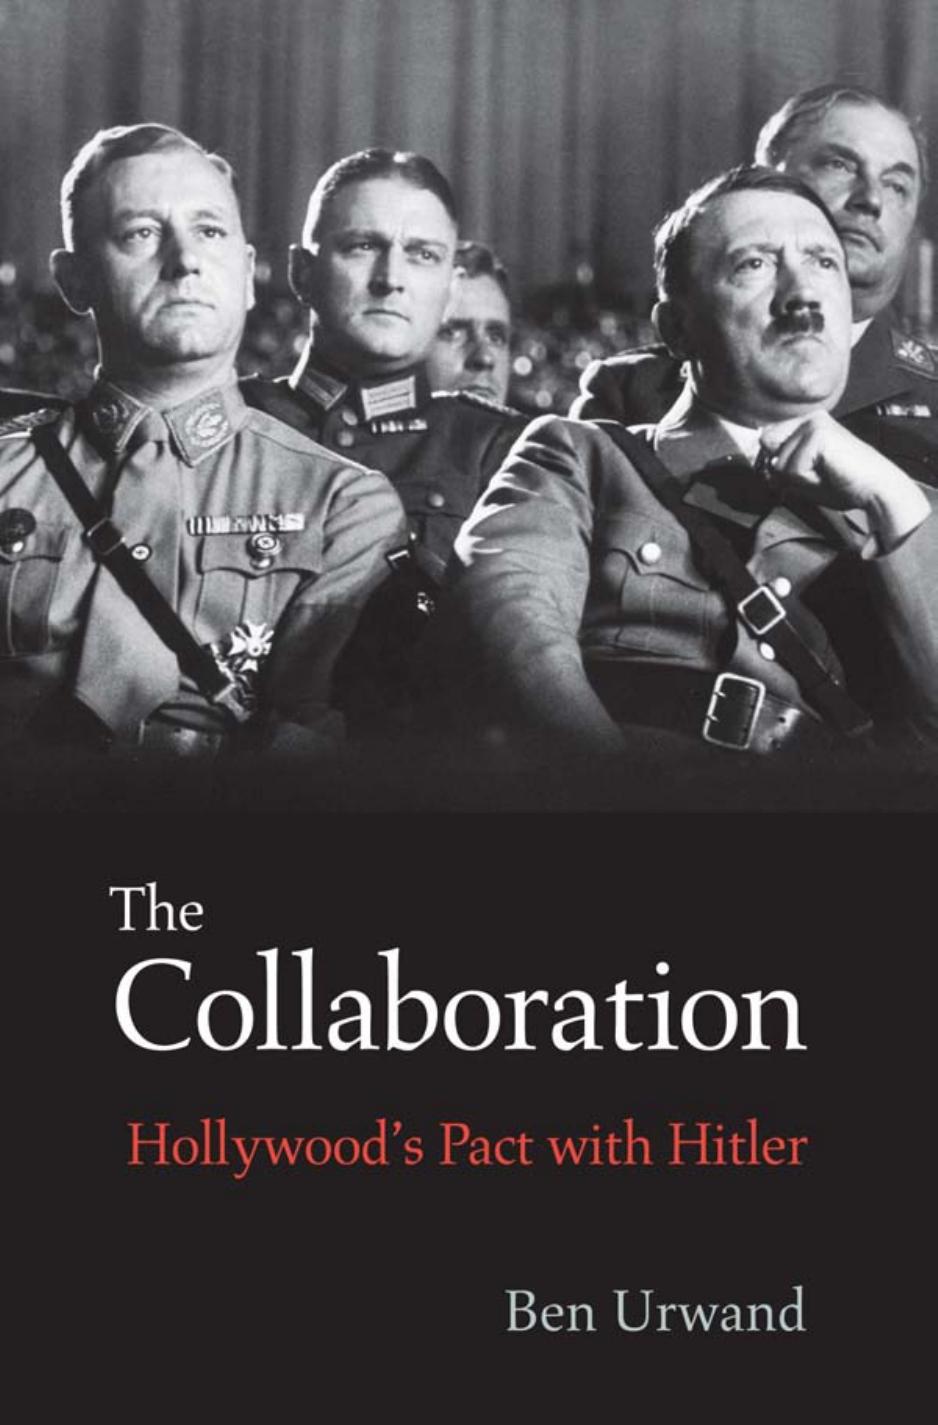 The Collaboration: Hollywood's Pact With Hitler by Ben Urwand (Author)